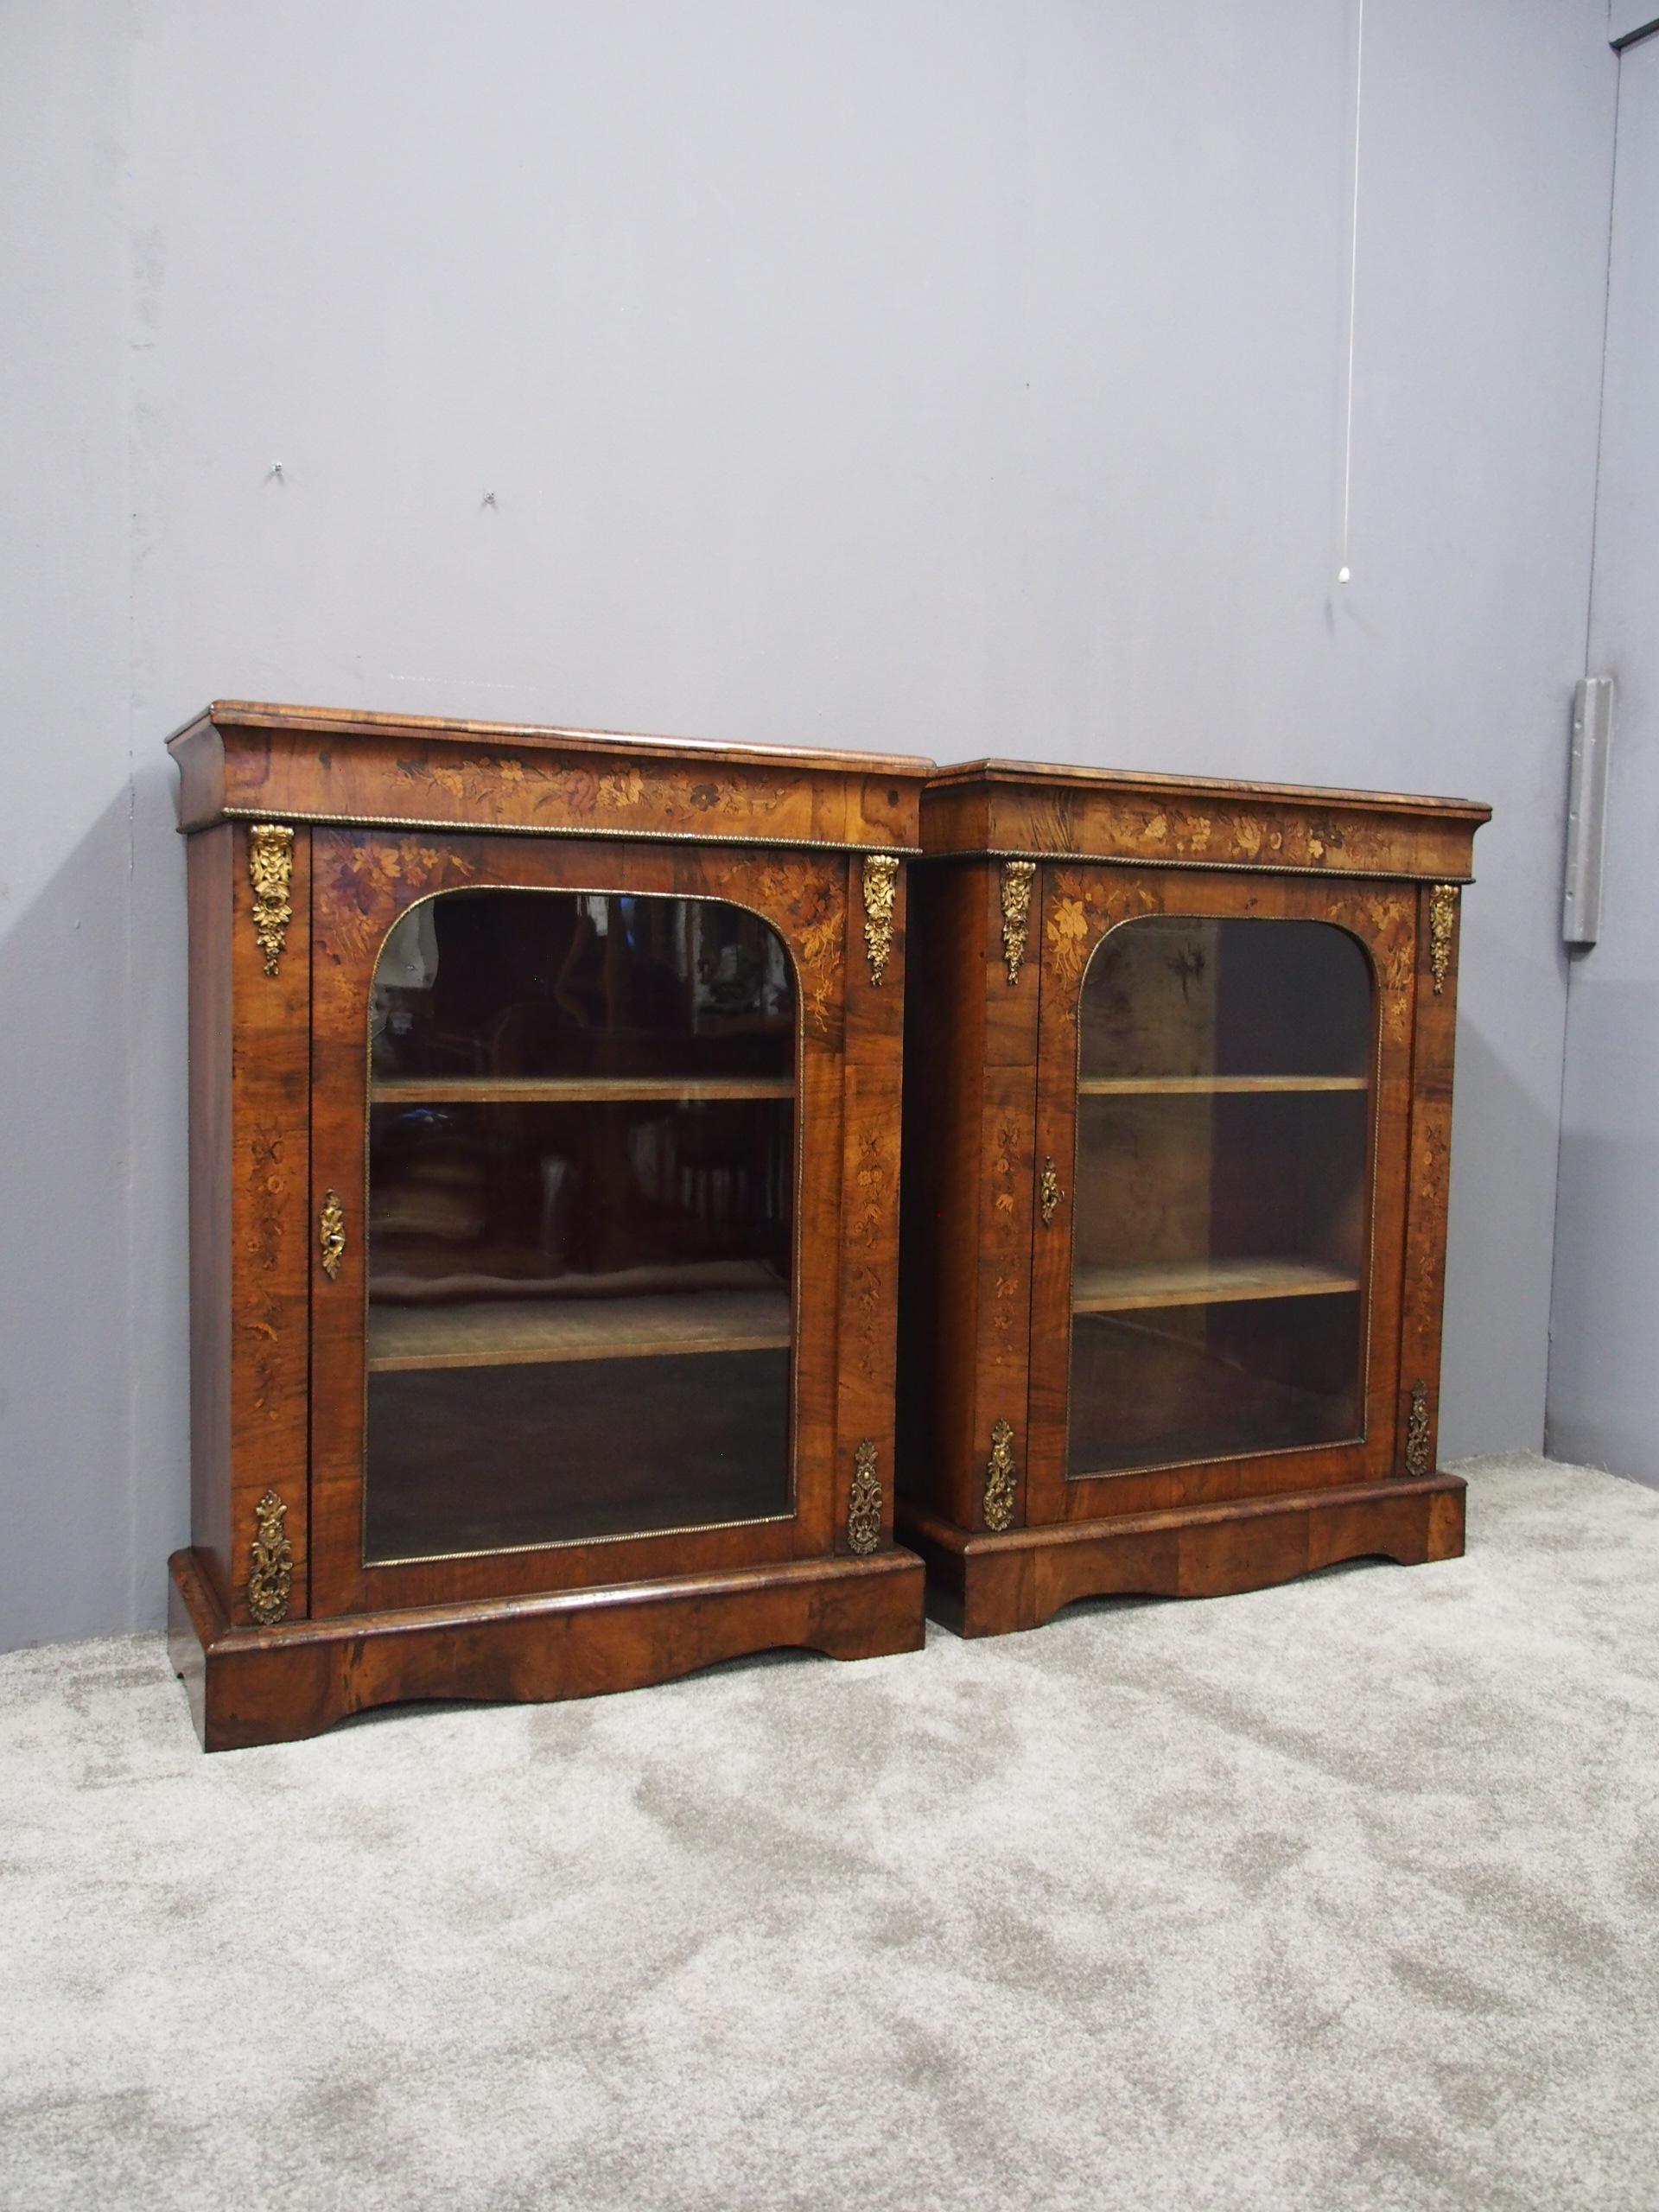 Pair of mid-19th century marquetry inlaid walnut pier cabinets, circa 1870. The rectangular tops in figured walnut with moulded edges over an ormolu-mounted frieze with floral marquetry decoration. The inlaid and ormolu-mounted arched doors open to